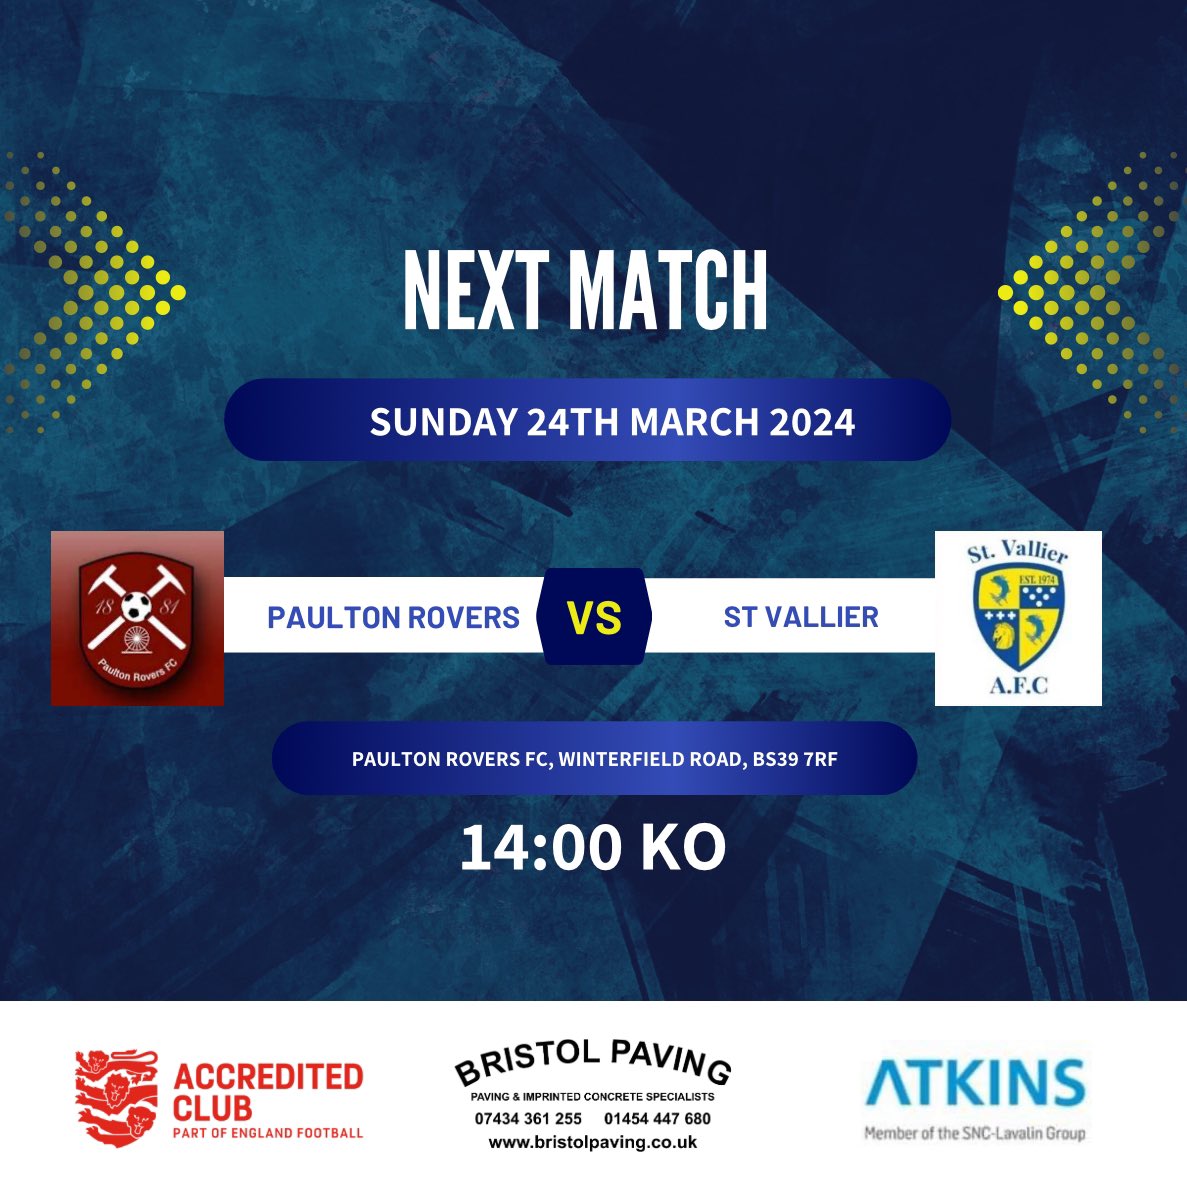 This Sunday we travel to @paultonroverslfc !
The first of the sides back to back fixtures against each other in the league. 

Get down and support the ladies ☺️ 

Thanks to our sponsors @bristolpavingltd for their continued support of the club! 

#utv 💙💛⚽️